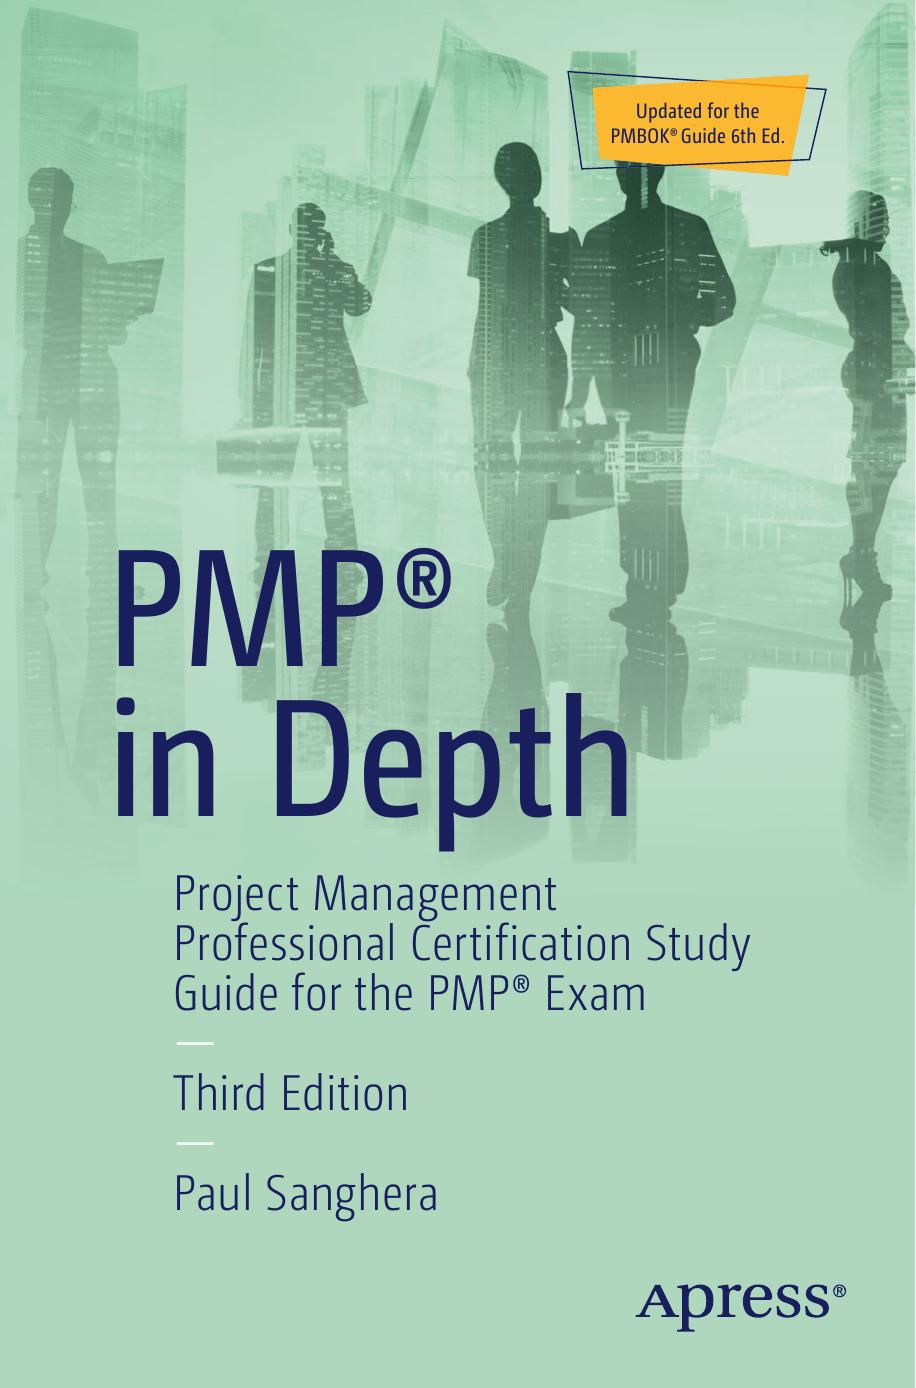 PMP® in Depth: Project Management Professional Certification Study Guide for the PMP® Exam